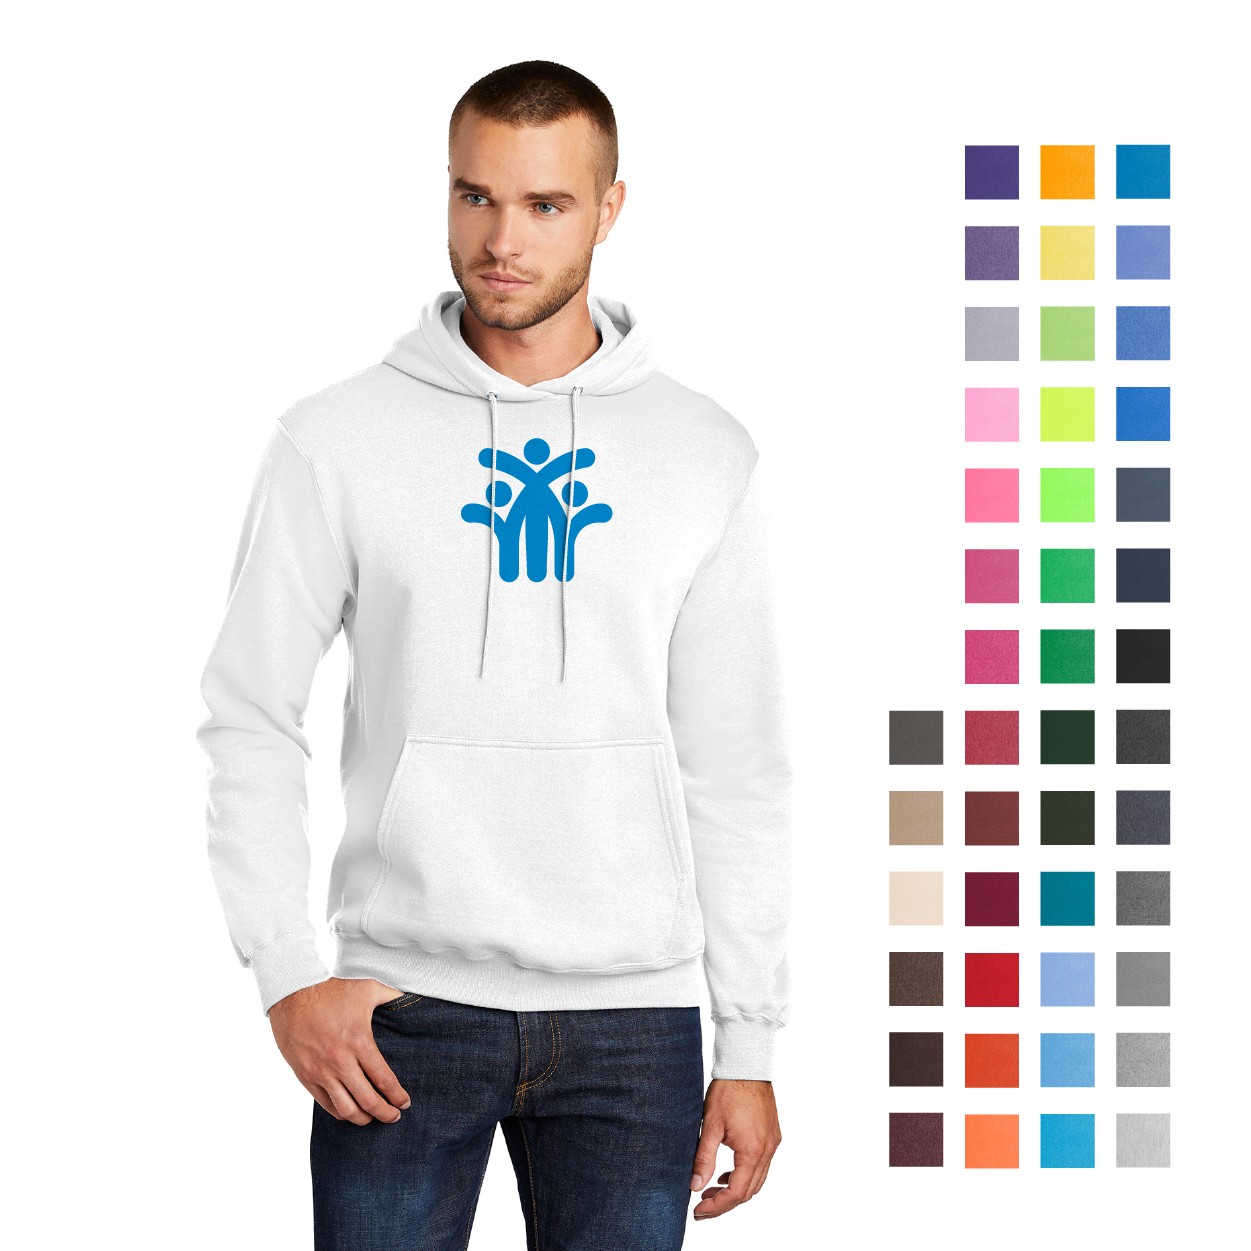 hoodies and sweatshirts as promotional products